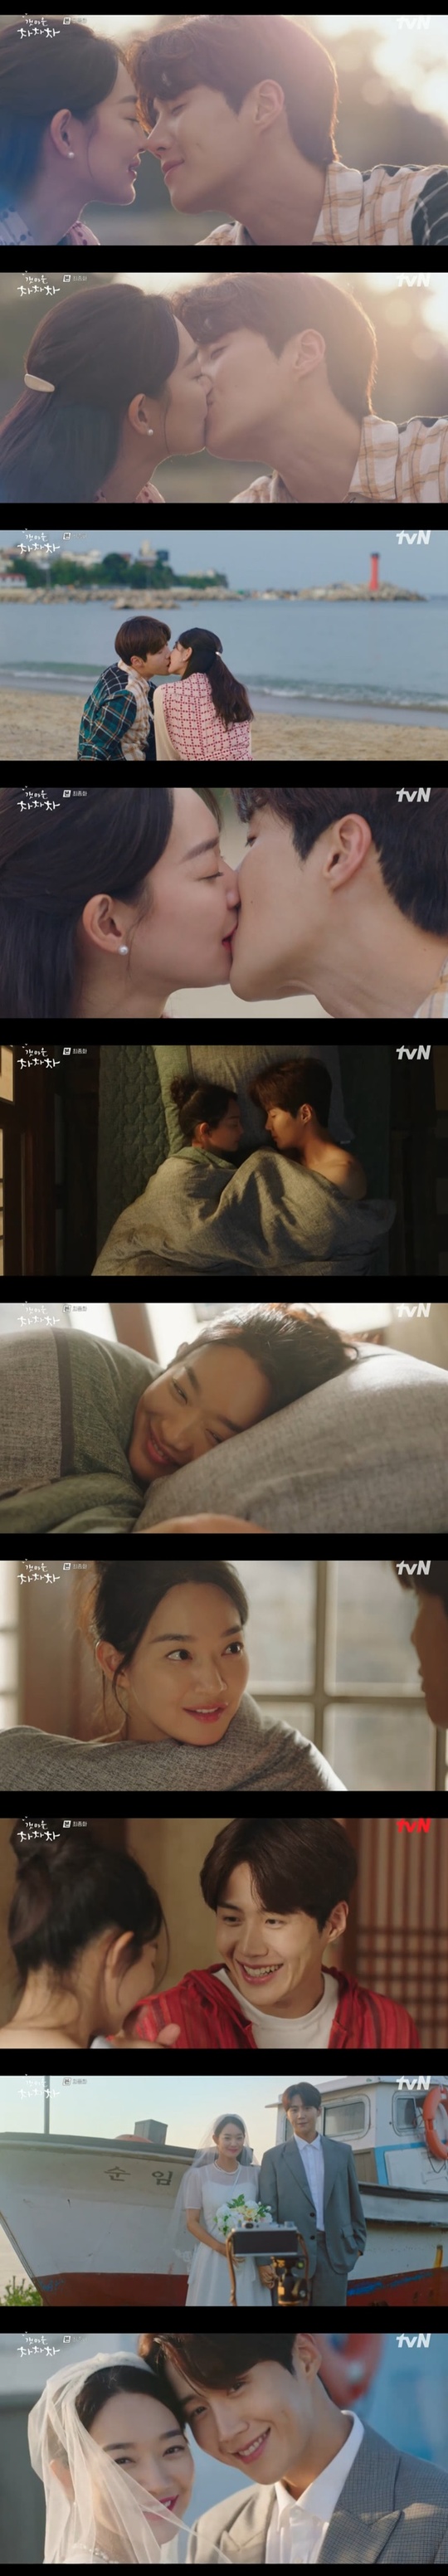 Shin Min-a and Kim Seon-ho exploded their skinship until the last meeting with the proposal marriage promise.Yoon Hye-jin (Shin Min-a) and Hong Doo-sik (Kim Seon-ho) had a Happy Endings in the 16th TVN Saturday Drama Gangmae Cha Cha Cha Cha (Last episode/The plays Shin Ha-eun/Director Yoo Jae-won) broadcast on October 17.On the same day, Yoon proposed to Hong Doo-sik first, and Yoon said, It would have been really absurd. The first woman I saw asked me to find her shoes, and lend me money.Ive been doing this all day, and I think the waves of the day have taken us here, like these shoes have come back to me.Will you marry me, Mr. Handy, Mr Hong?Hong said, No. I tried to propose, too. I tried to propose. Yoon said, What is important first? Its important that you have the same mind.Lets think of it as running. Hong Doo-sik gave a chance to Hong Doo-sik, and Hong Doo-sik presented a necklace prepared and said, Lets put two pairs of shoes in the front hall, two aprons in the kitchen,I will live with me all the time tomorrow in such a house. Yoon Hye-jin and Hong Doo-sik promised to marry with a kiss, and the two began preparing for the marriage by sharing the housework. Yoon Hye-jin, who likes clothes, decided to take the laundry and Hong Doo-sik will clean it.When Hong Doo-sik asked, When will you call me Hong-bangjang? And recommended the title theorem, Yoon Hye-jin decided to call Hong-doo-sik his own.They kissed again when their eyes met and spent the night together saying, I will not go home today.The morning after bedtime, Hong Doo-sik told Yoon Hye-jin, I want you two. The child. One seems lonely and the three seem to be too hard for you.I think theyll be good, regardless of gender, said Yoon, who said, Two? Then well have to hurry diligently.Then, during the cleaning time of the resonance village, Yoon Hye-jin and Hong Doo-sik announced their marriage, We are getting married. The people who resonate were more pleased.